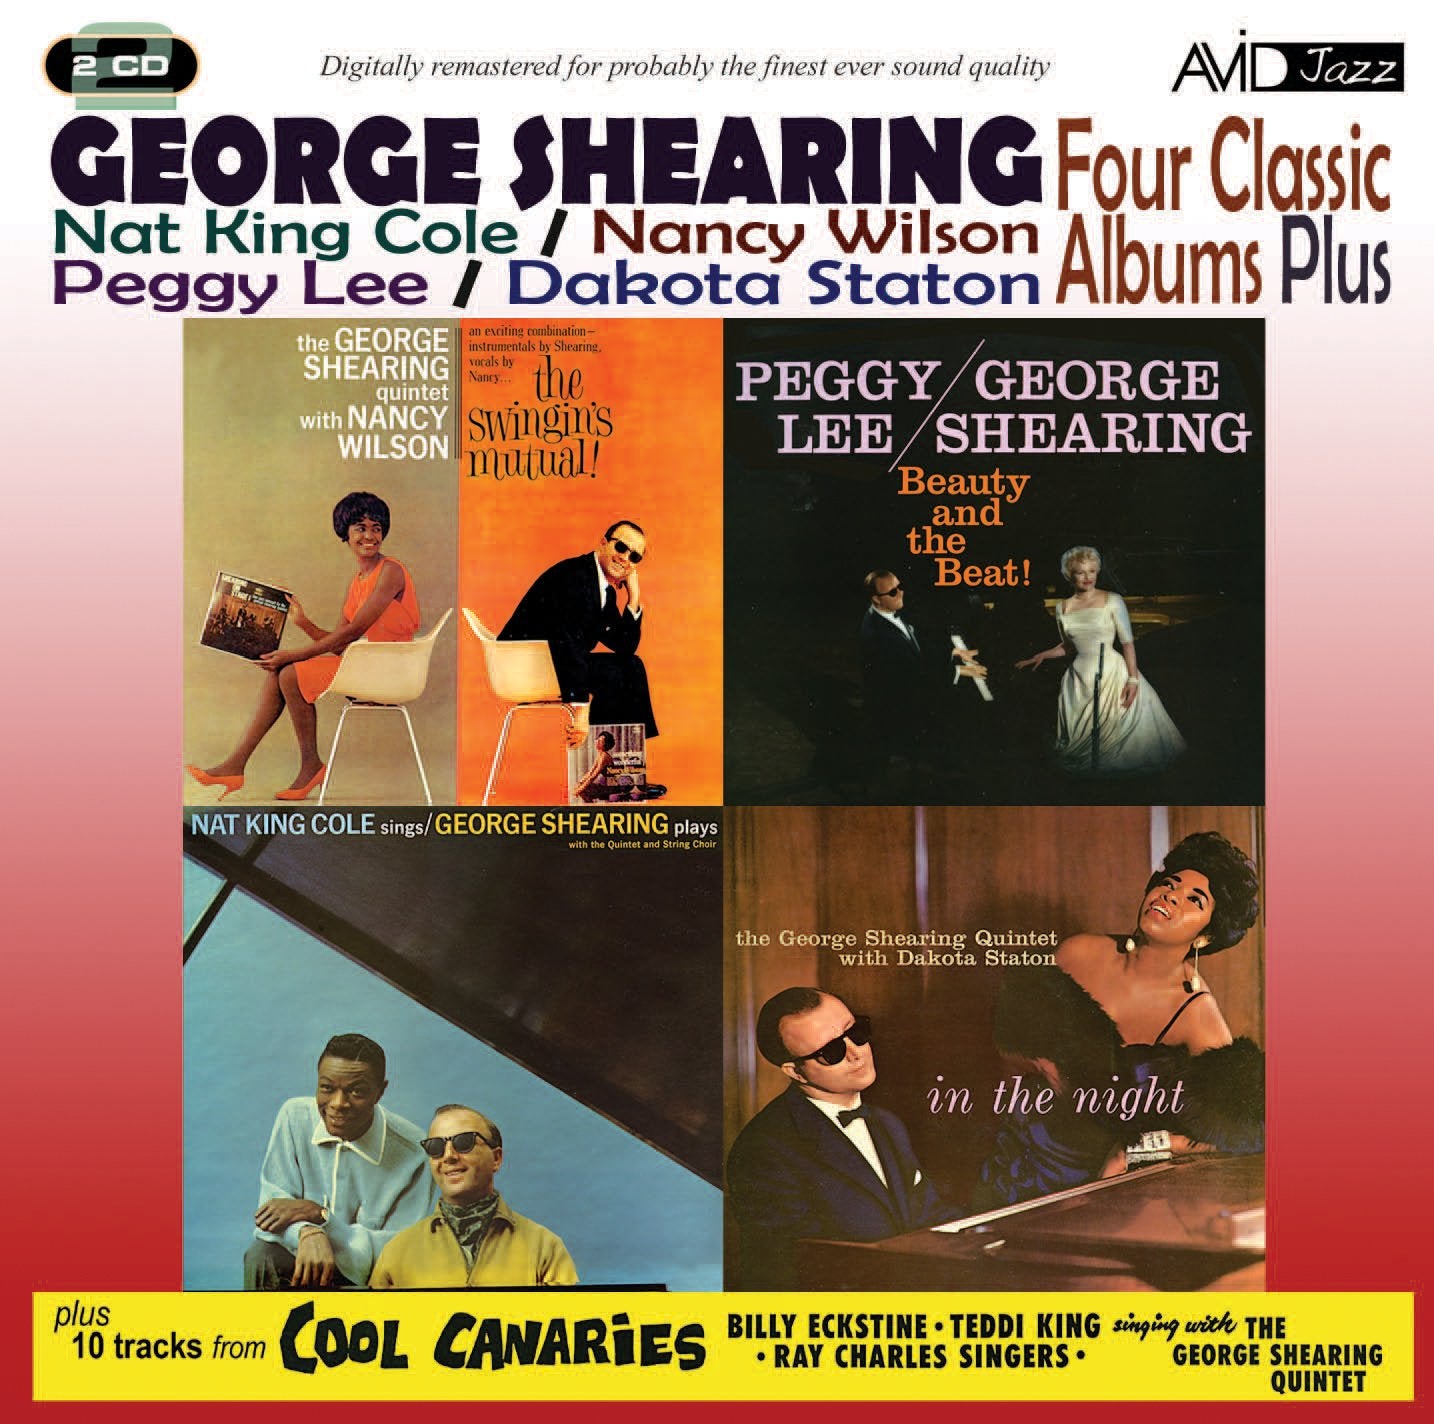 GEORGE SHEARING - Four Classic Albums Plus (2 CDs)